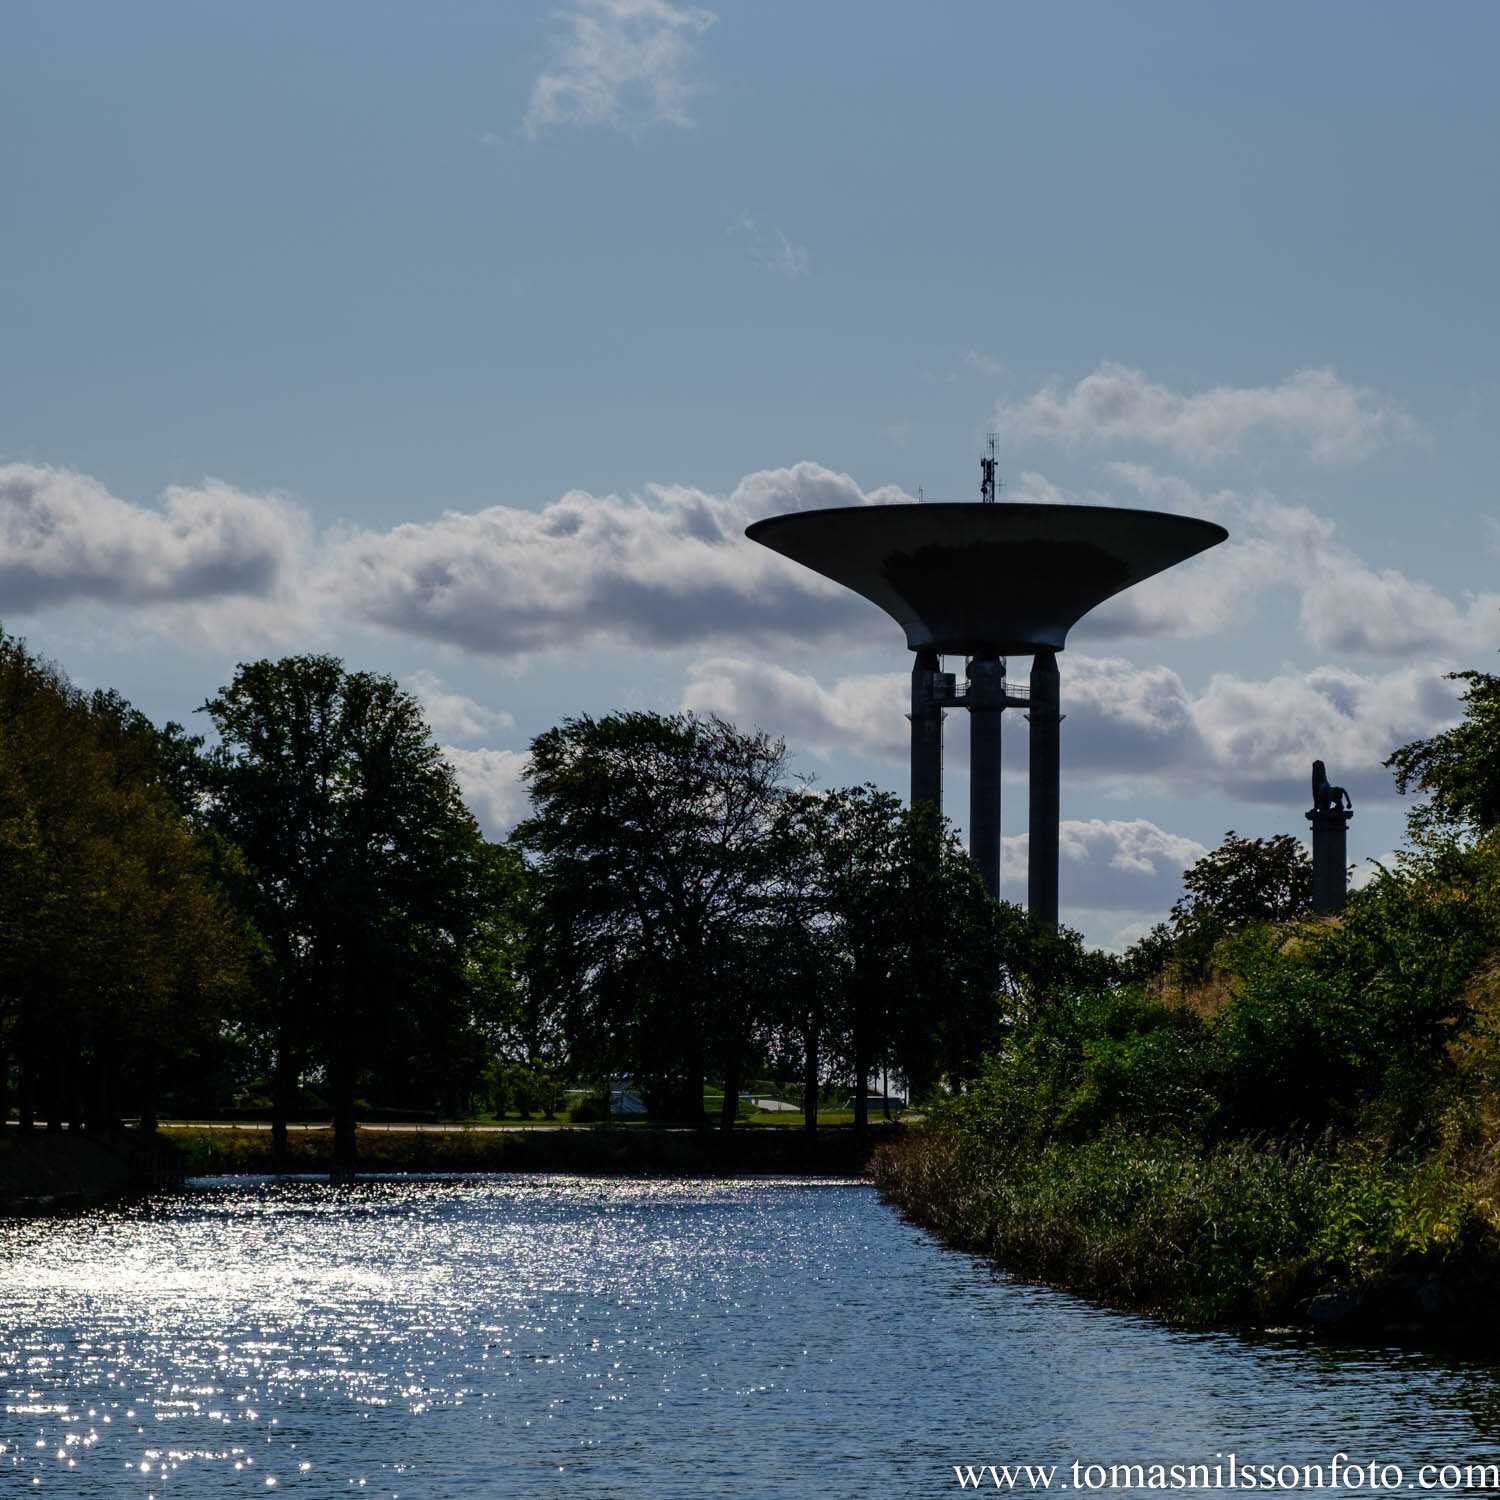 Day 264 - September 20: Water Tower